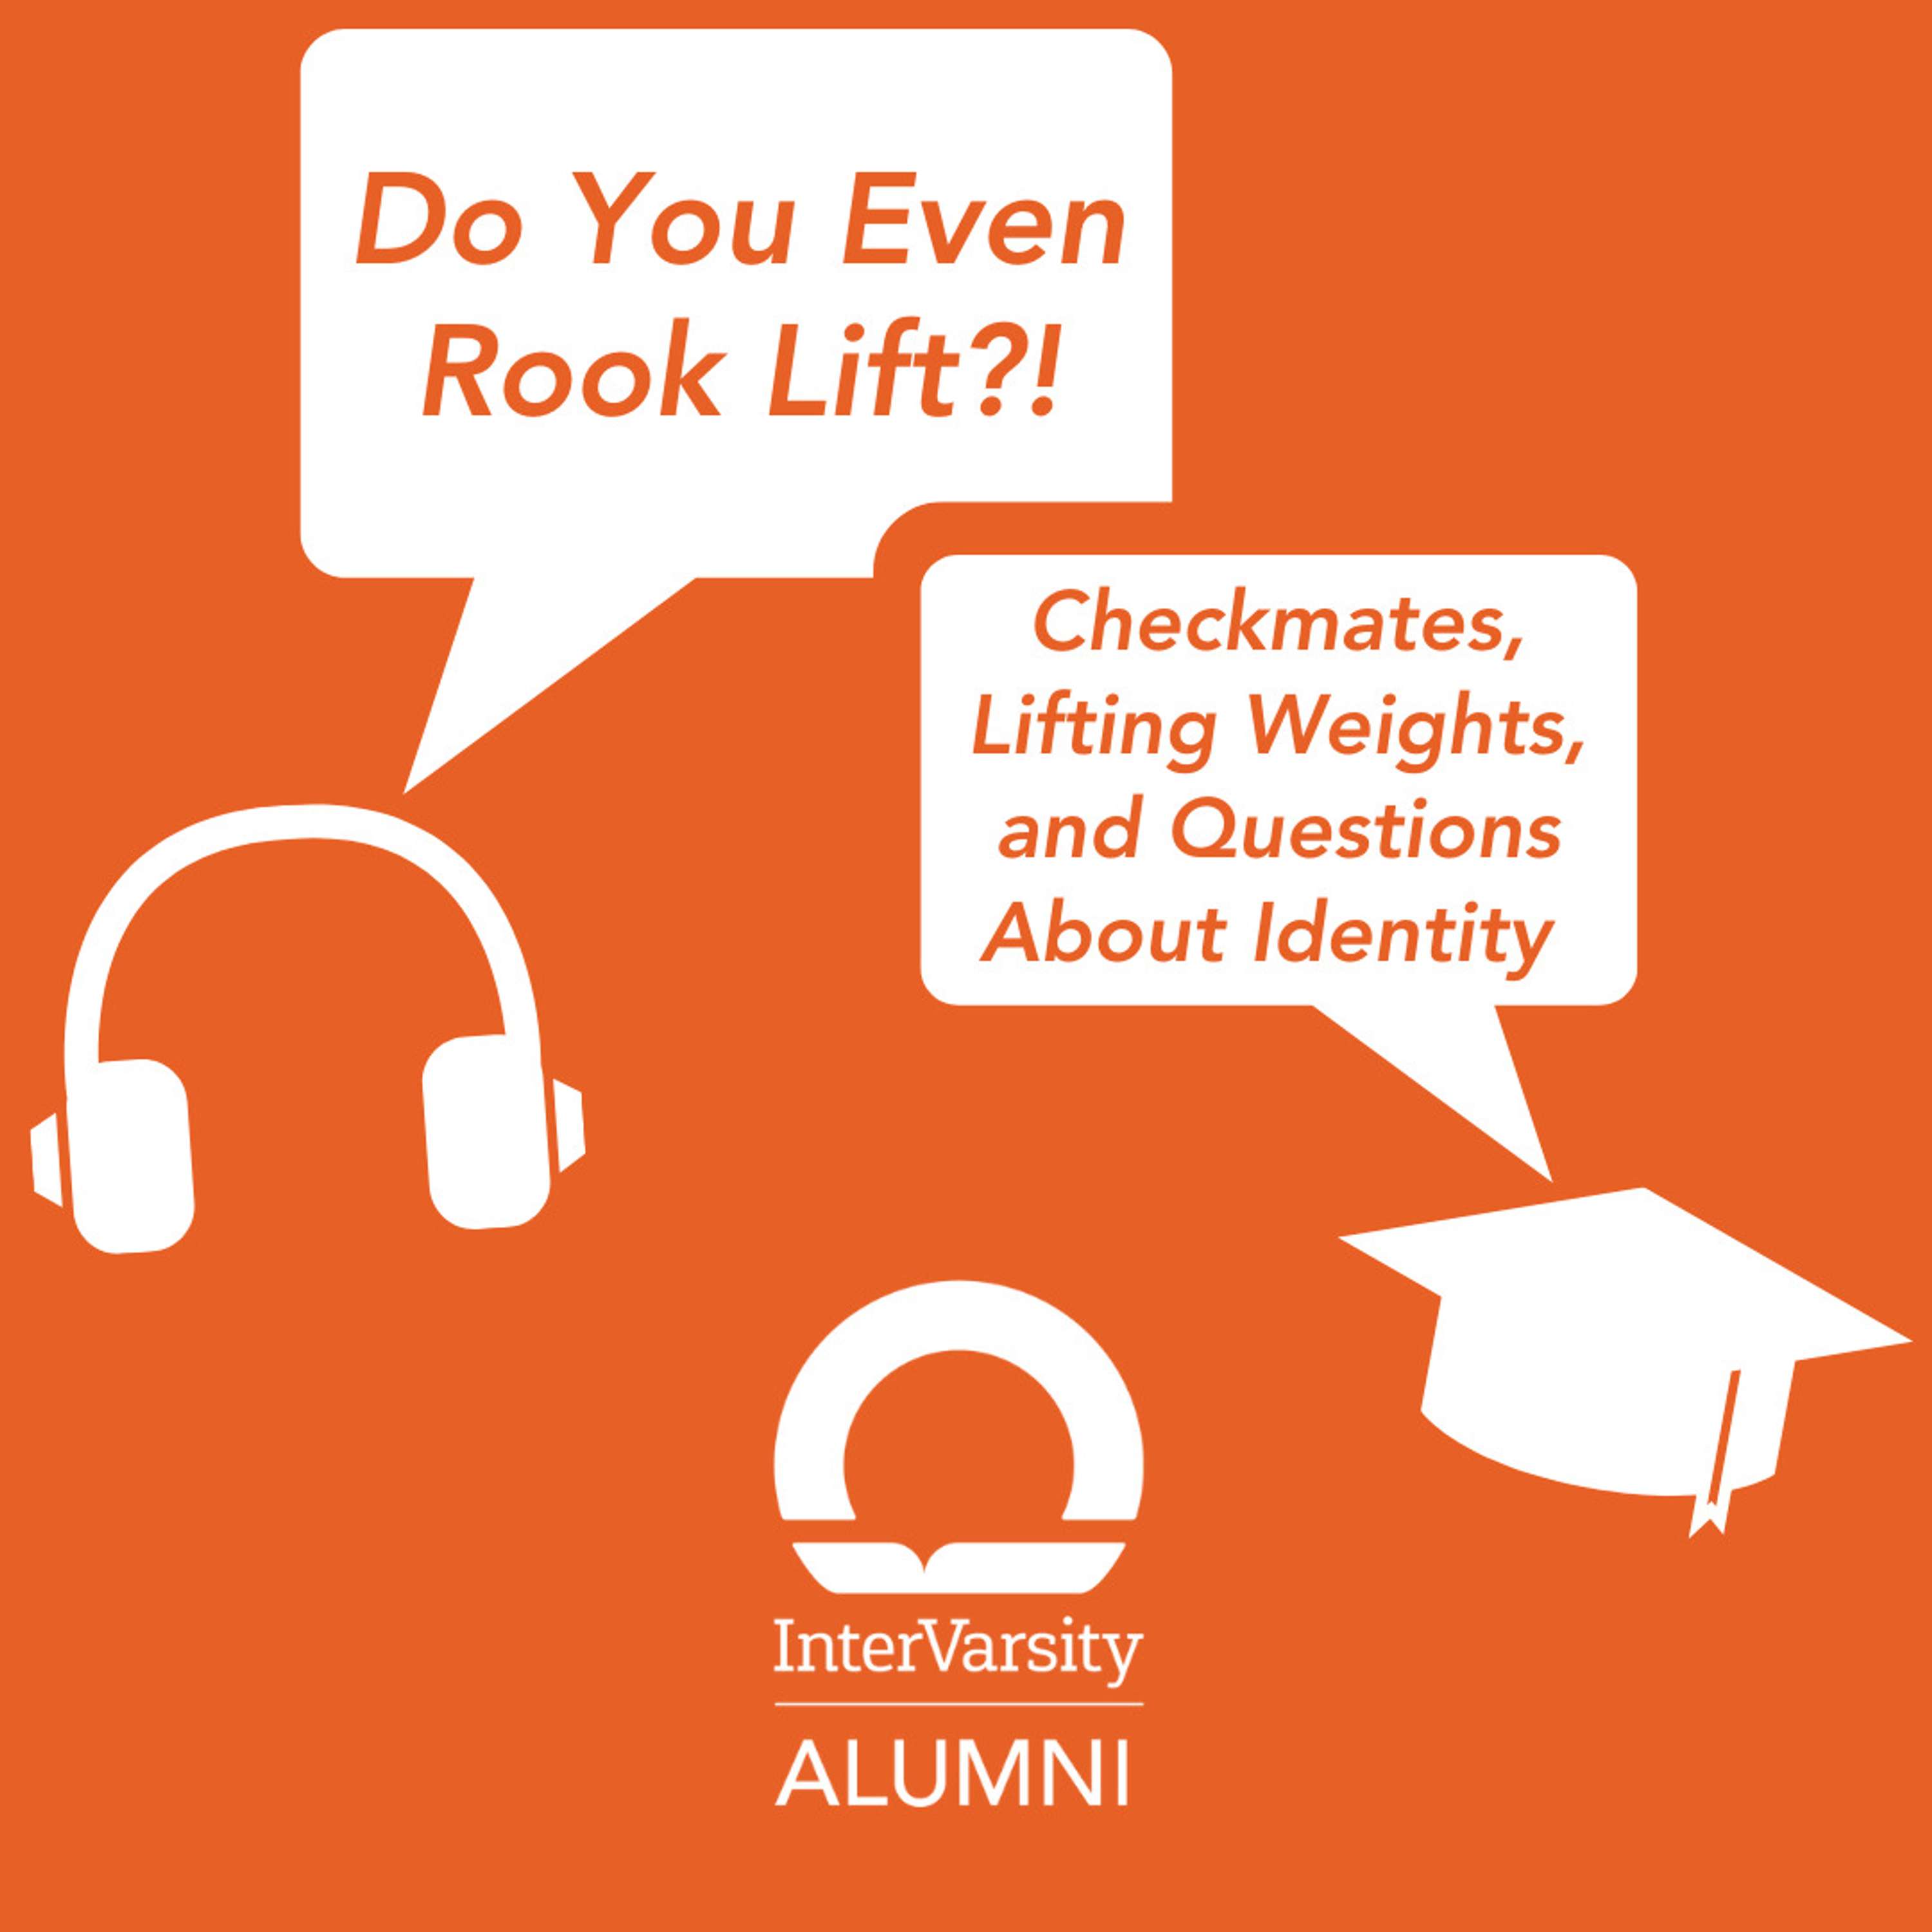 E67: Do You Even Rook Lift?!: Checkmates, Lifting Weights, and Questions About Identity